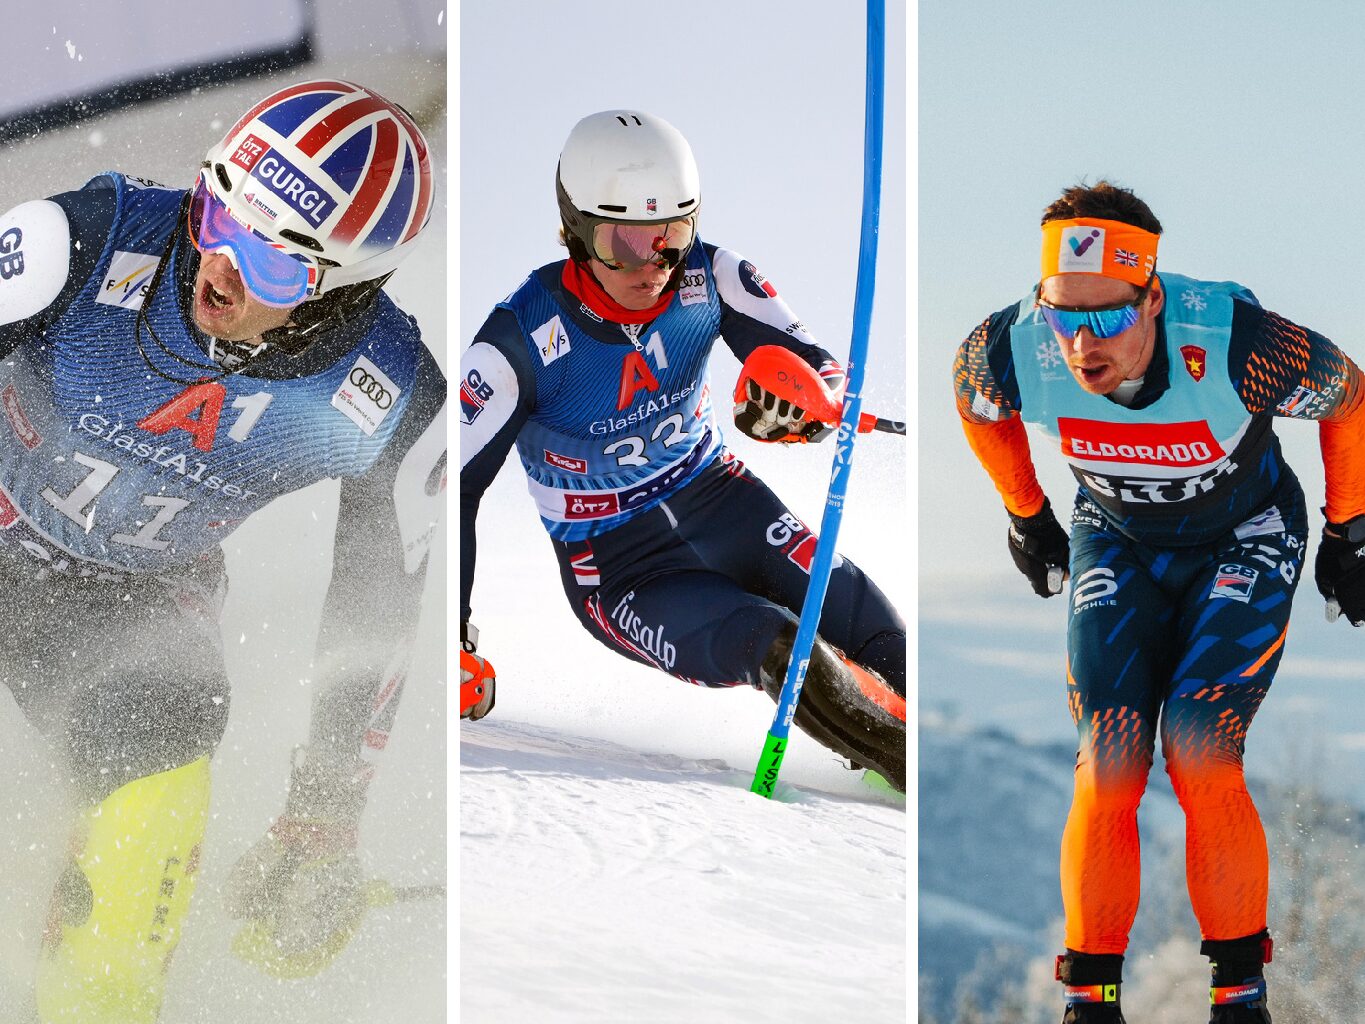 Brits’ strong start to season continues with impressive Slalom and Cross-Country performances 